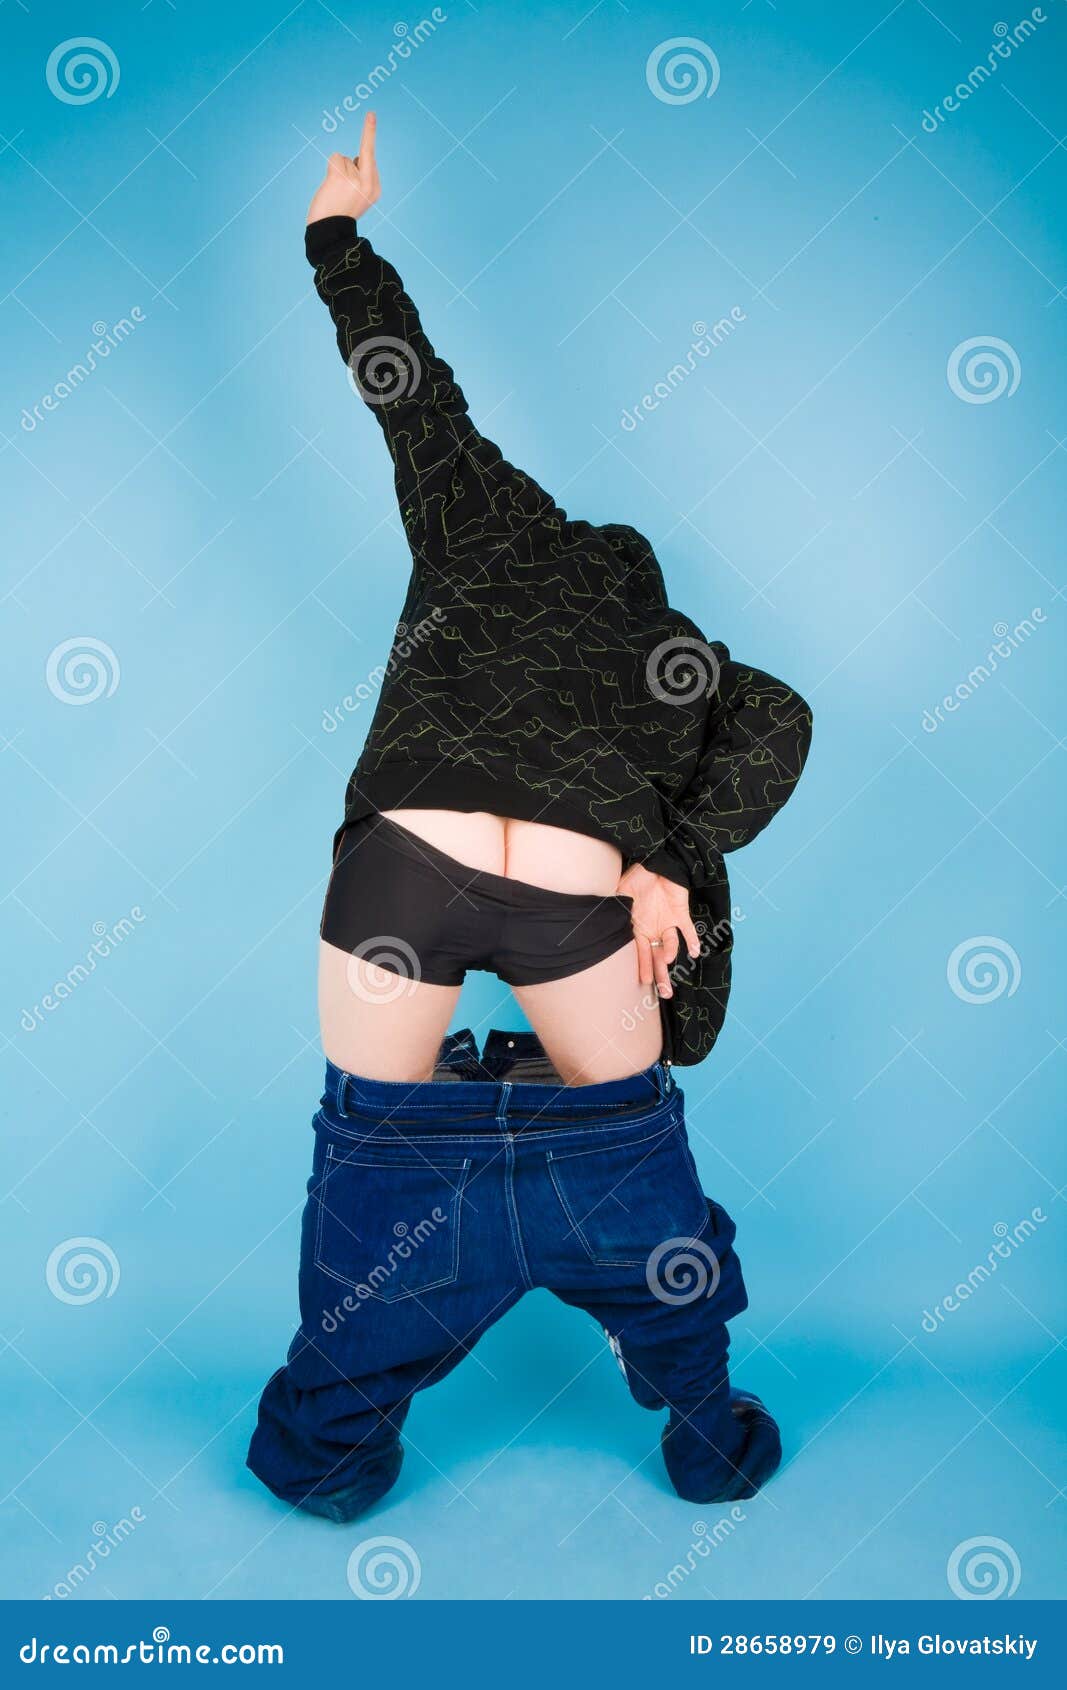 Man with his pants down gesturing on the blue background.